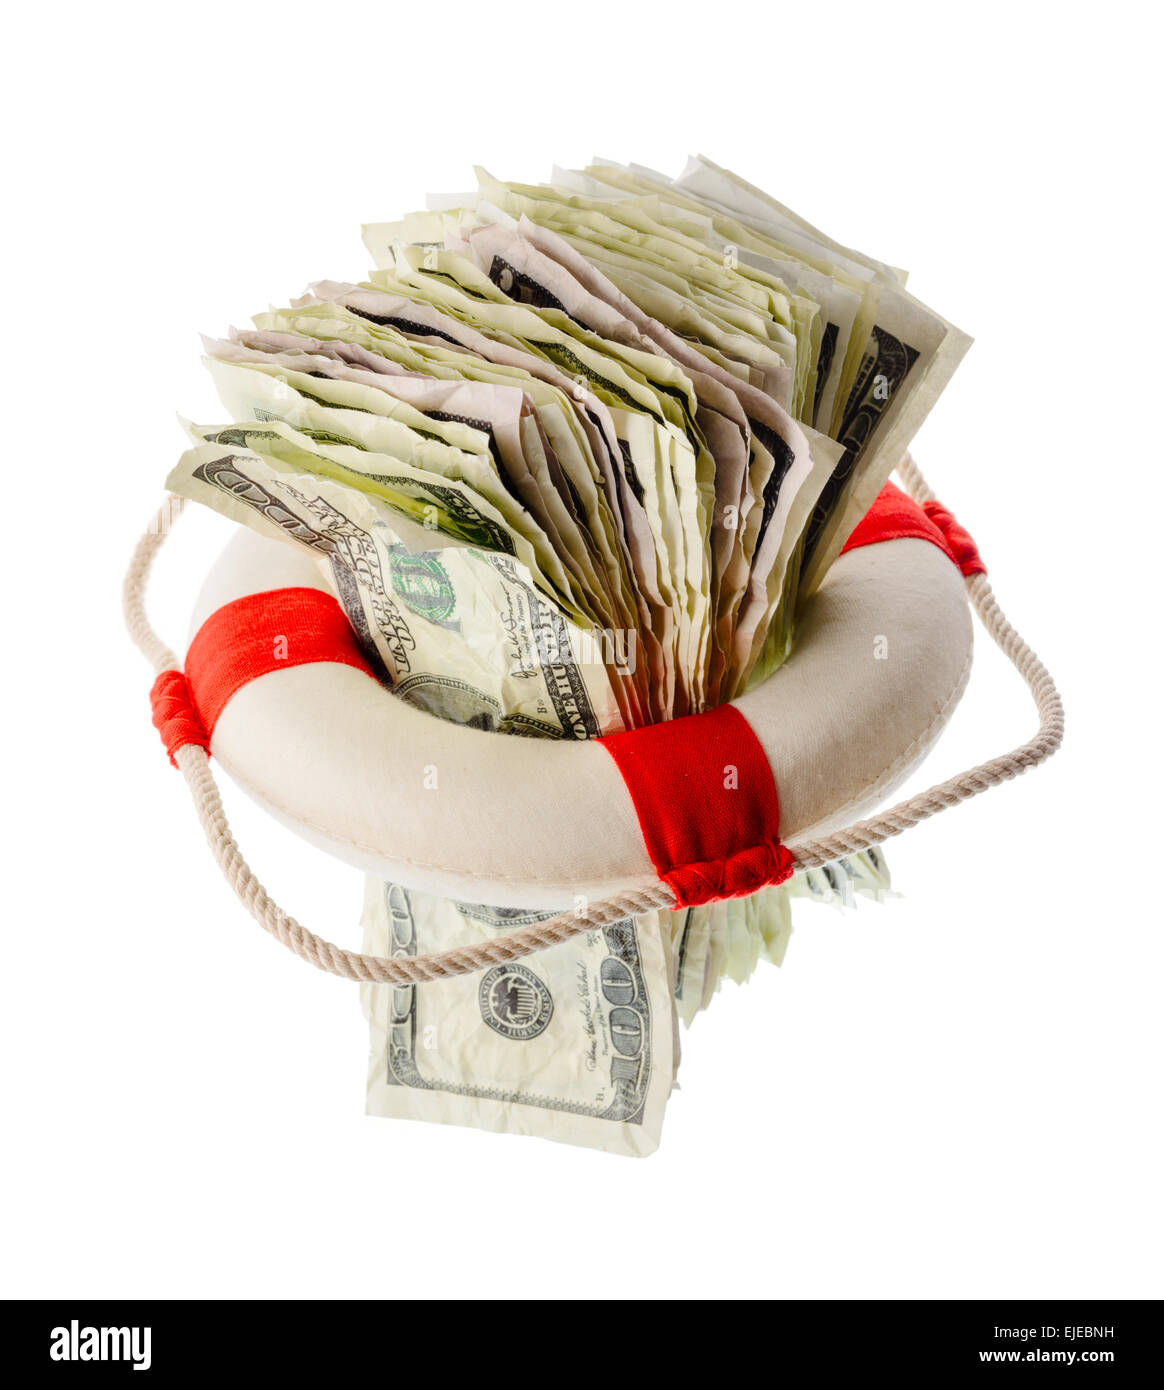 Money and finance: saving dollars, pack of one-hundred dollar bills inside a lifebuoy. Isolated on white background. Not a real Stock Photo